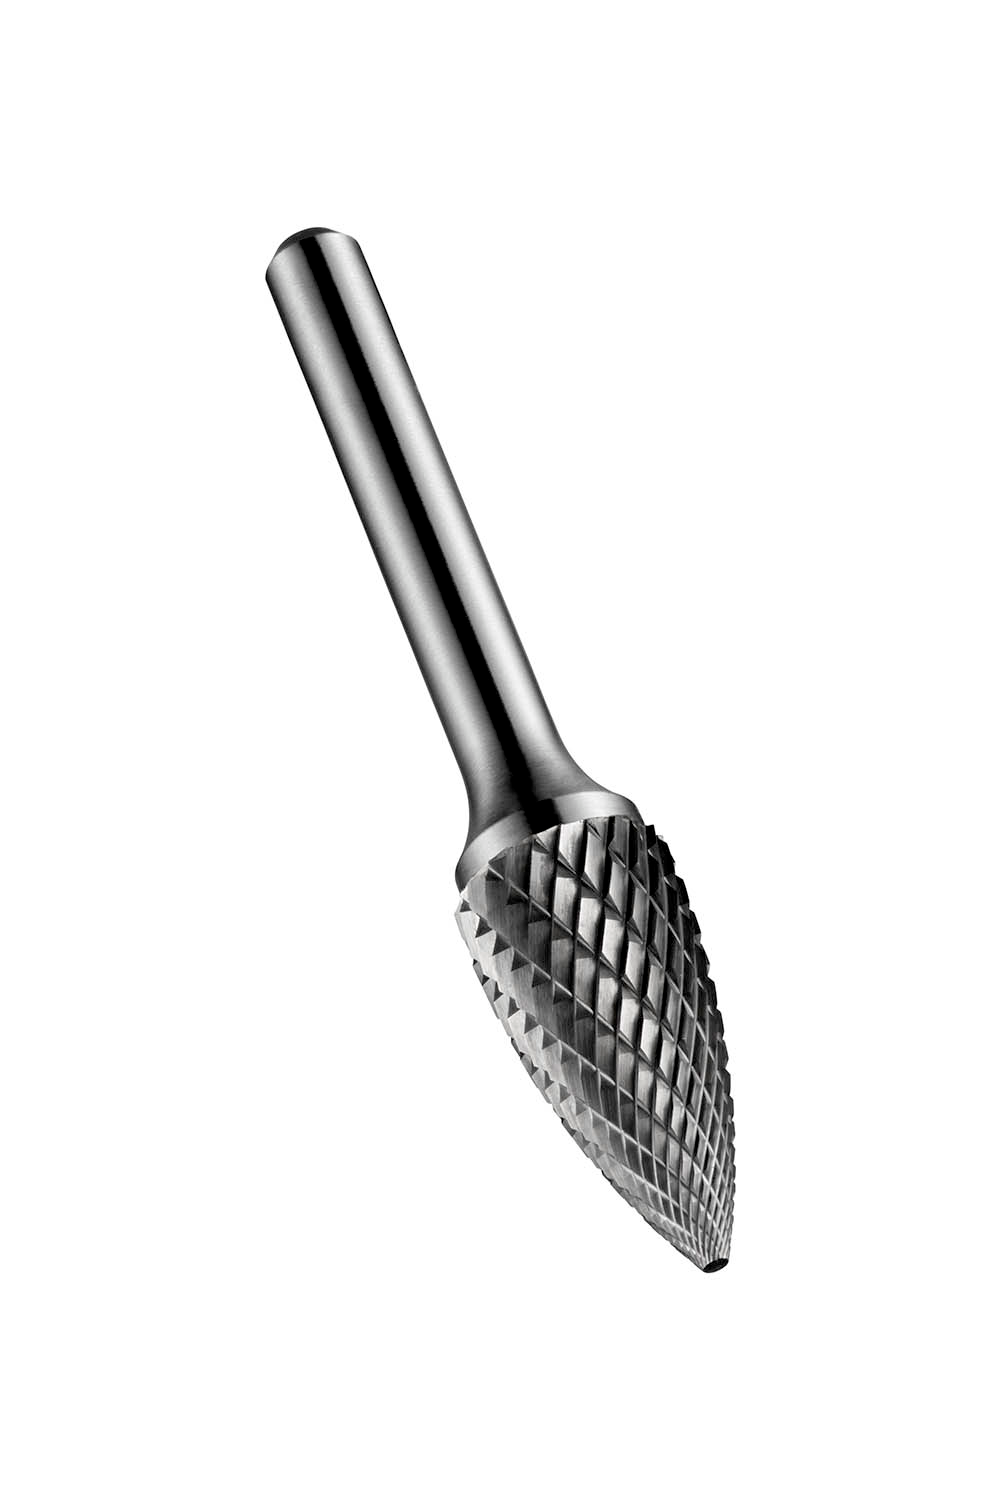 Dormer - P813 Solid Carbide Burr Bright Pointed Tree 9.60mm x 6.00mm